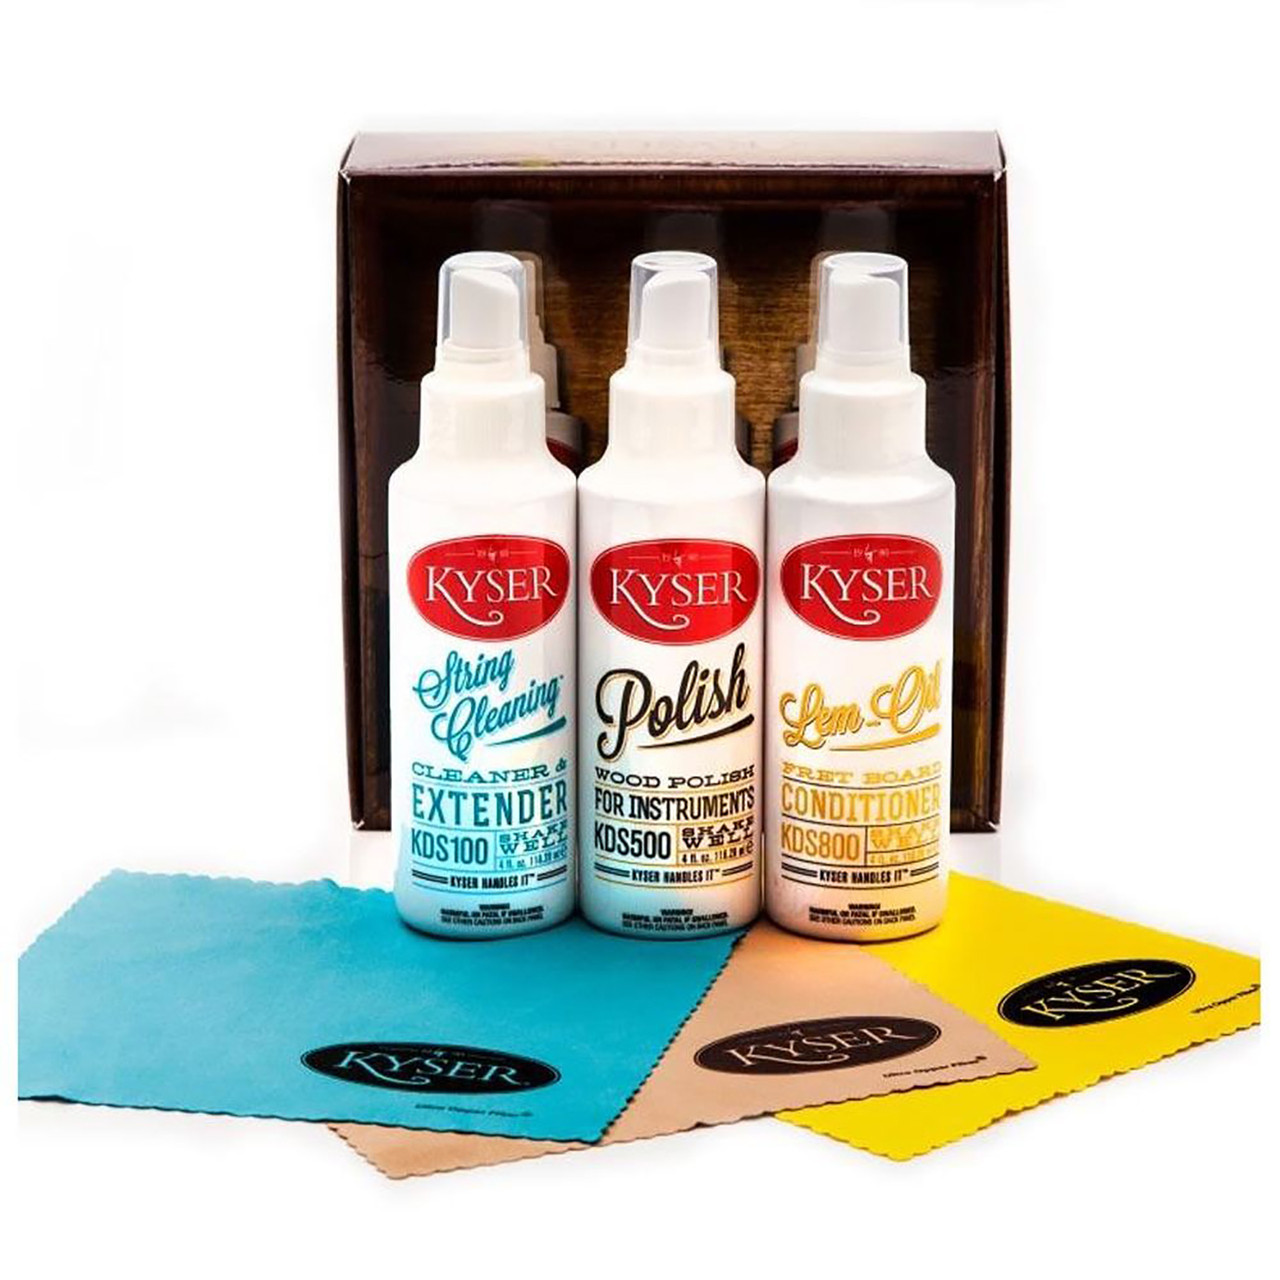 Kyser KCPK1 Guitar and String Instrument Care Kit with 